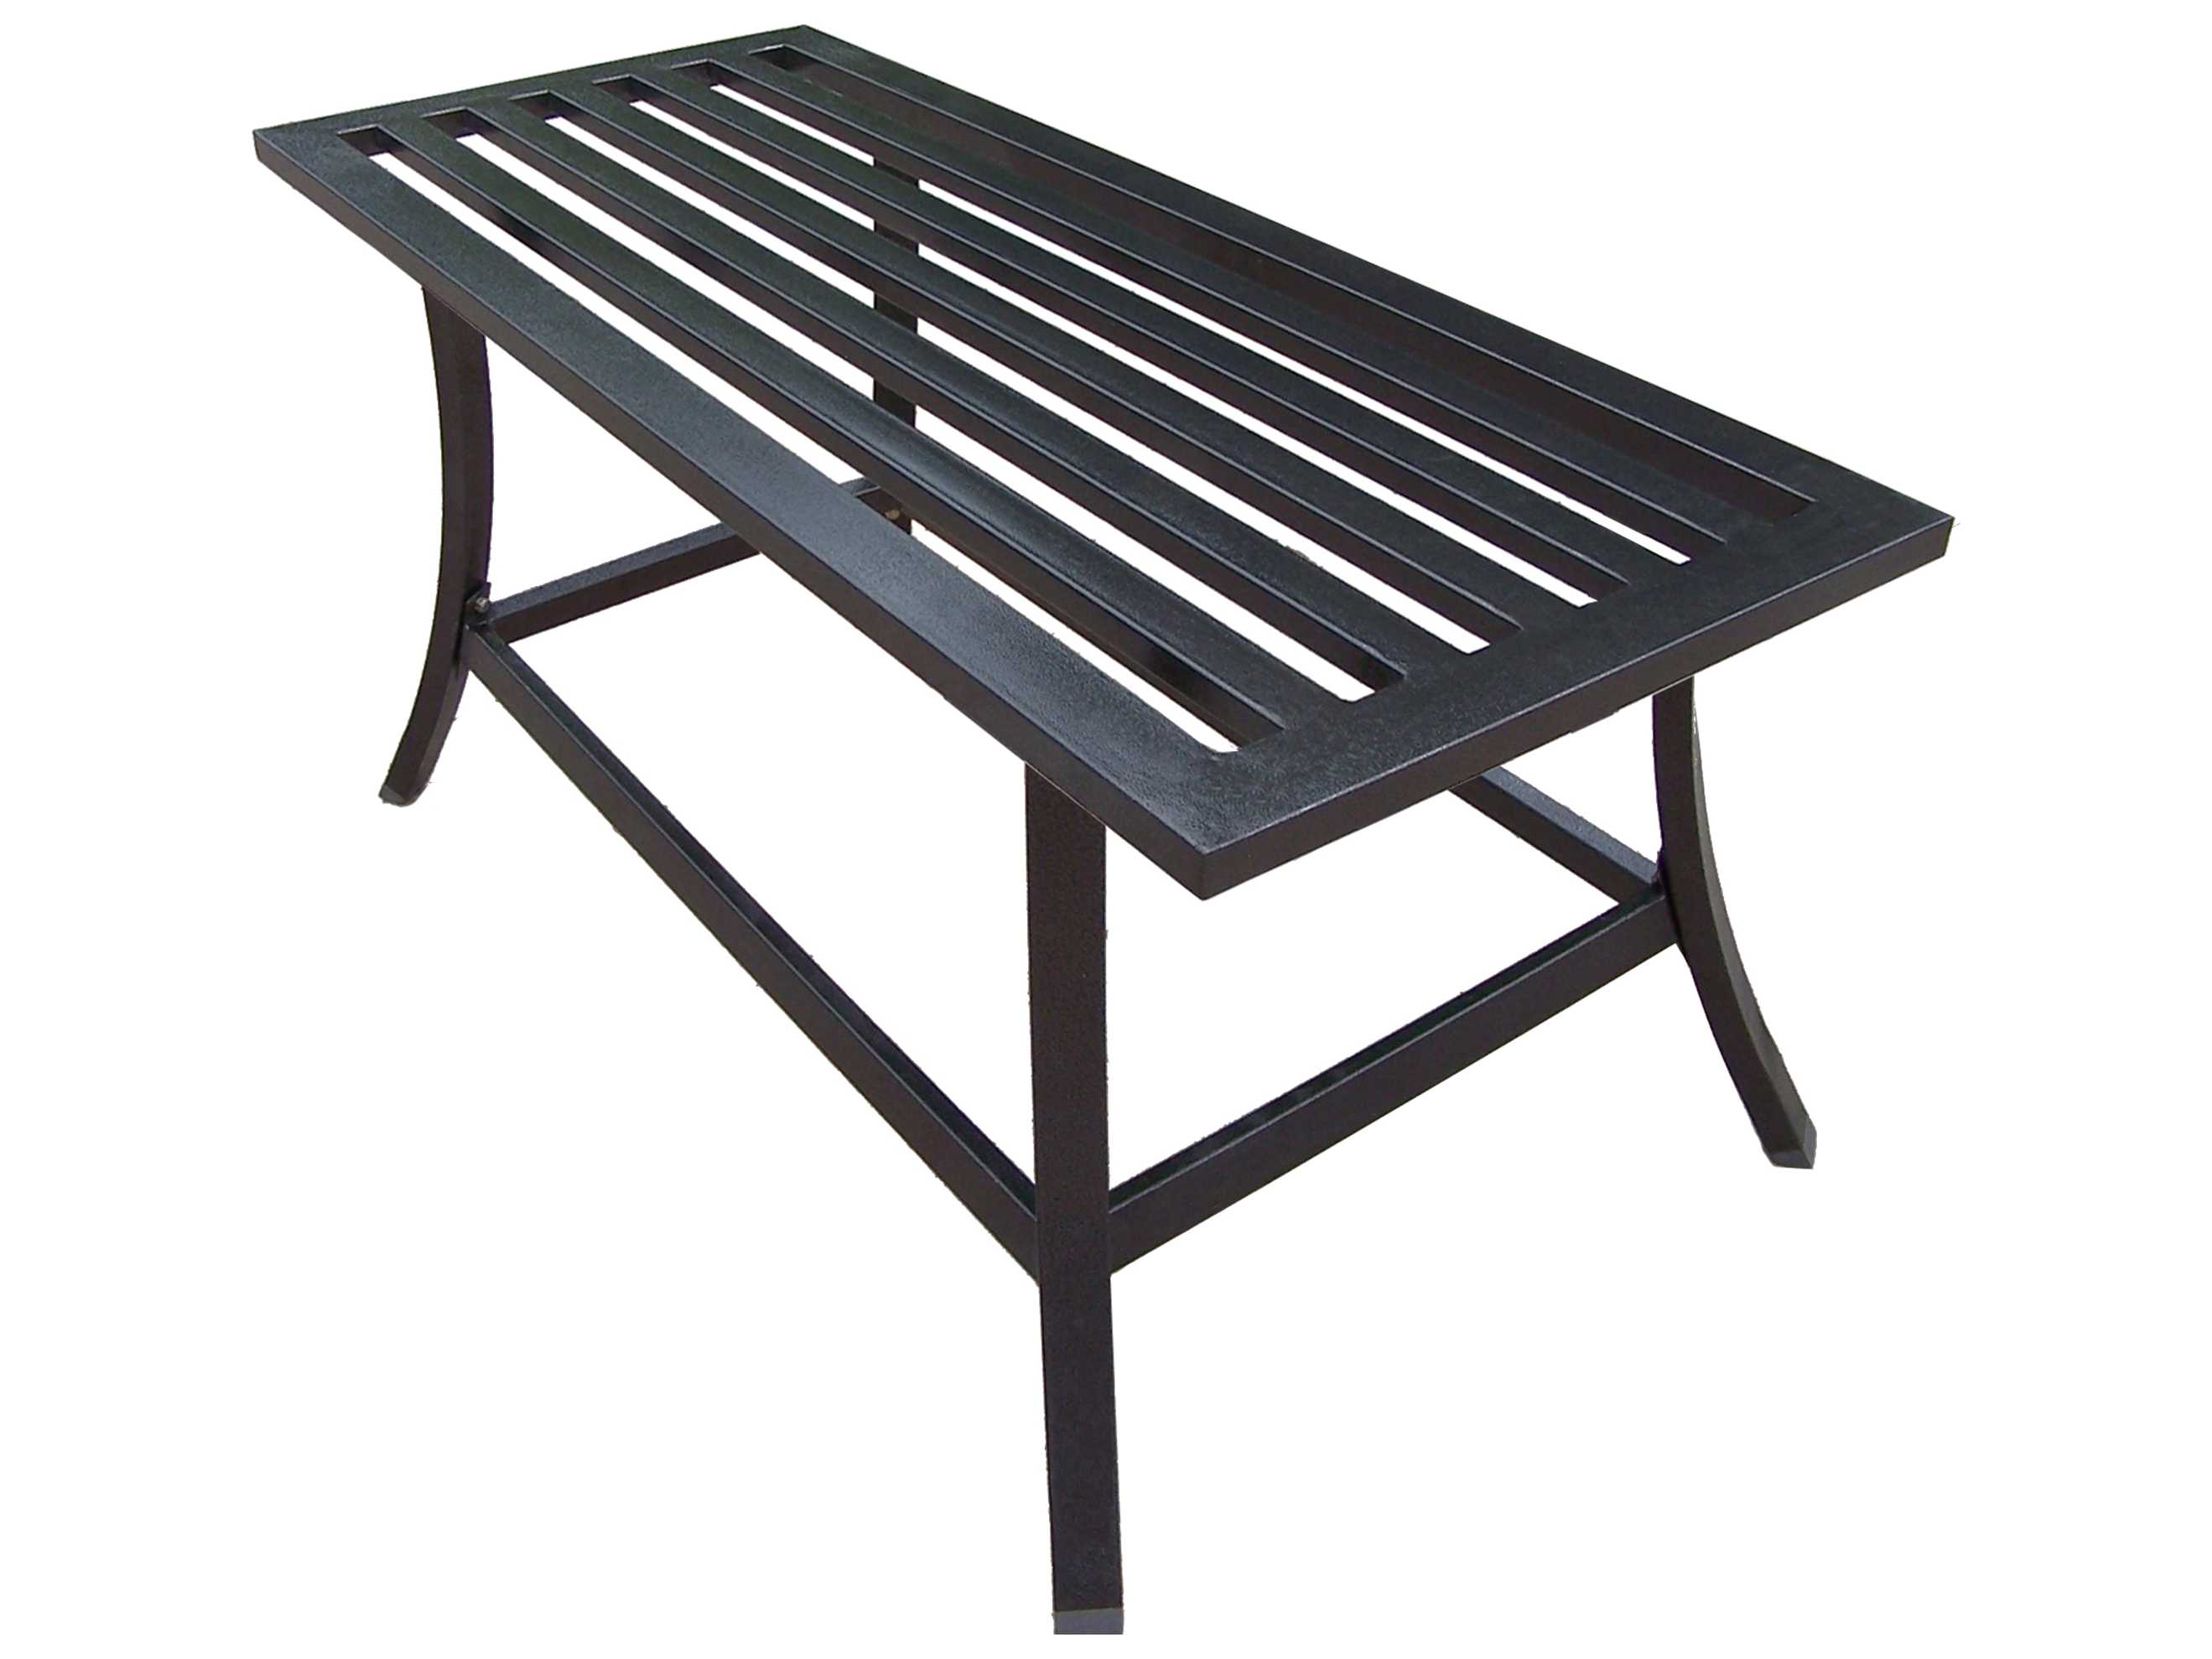 Oakland Living Rochester Wrought Iron 36 x 16 Rectangular Coffee Table